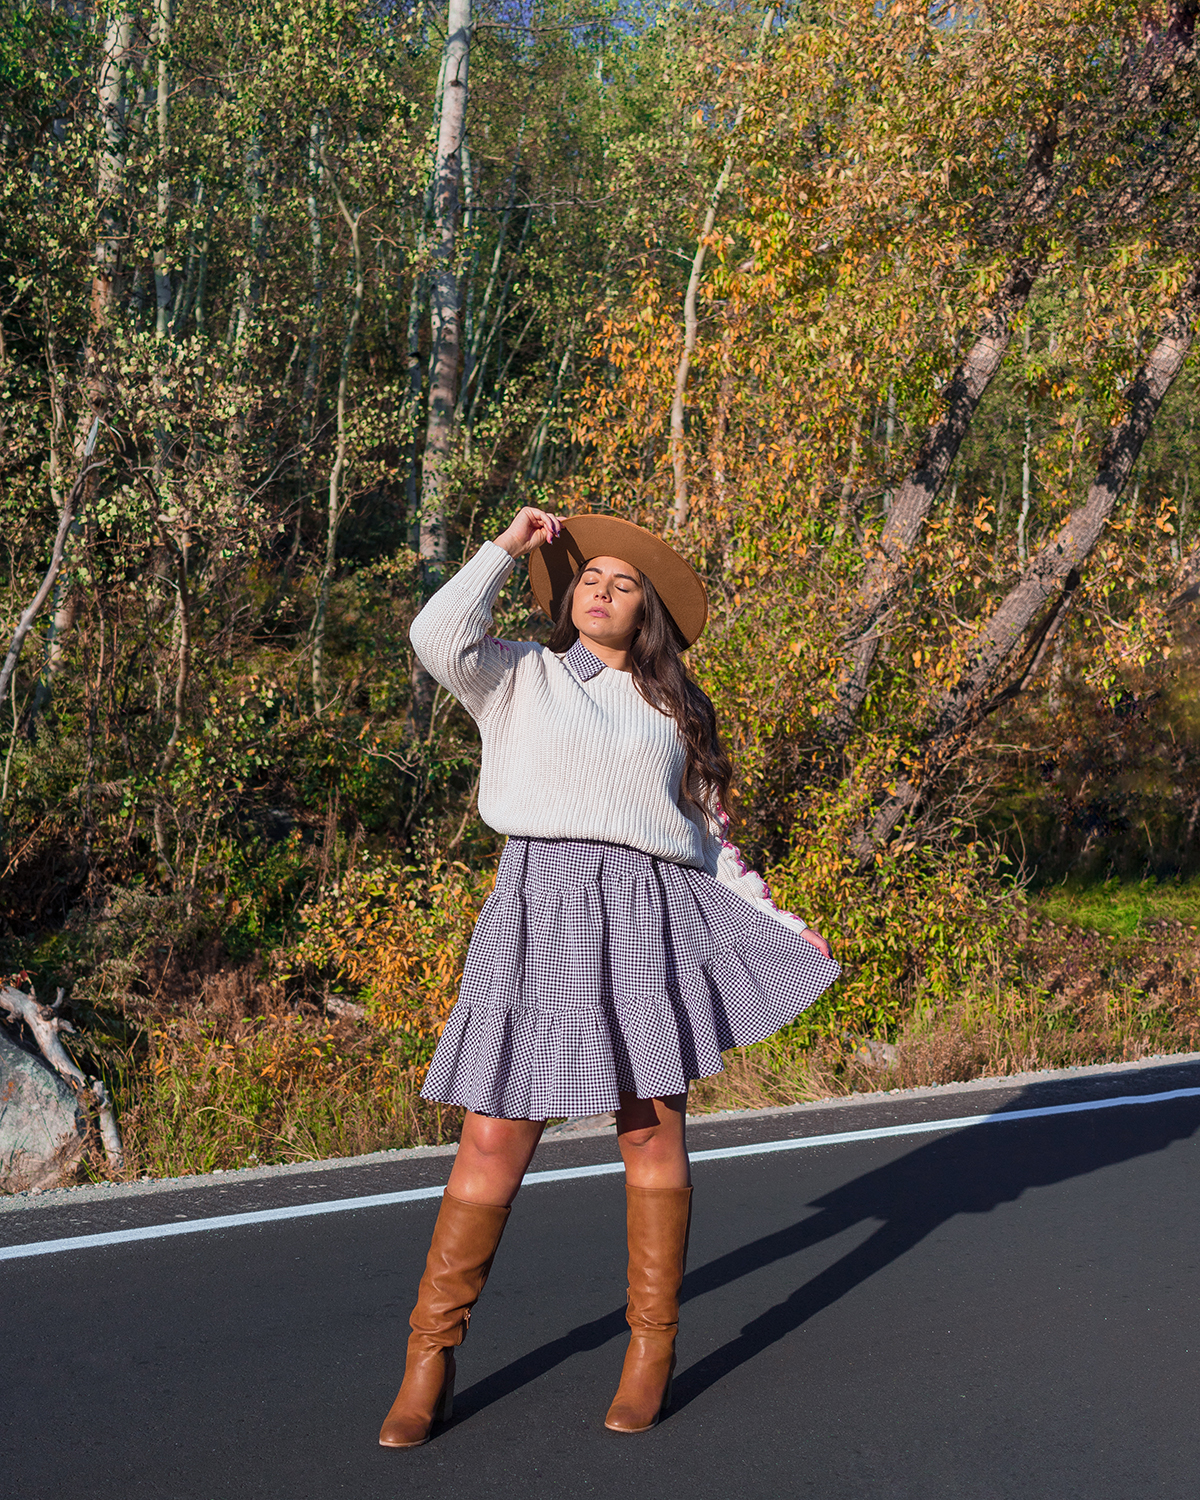 Lauryn Hock in Cottonwood Canyon wearinga Fall outfit of a dress layered under a sweater with knee-high boots and a wide brim fedora. Behind her are fall leavees